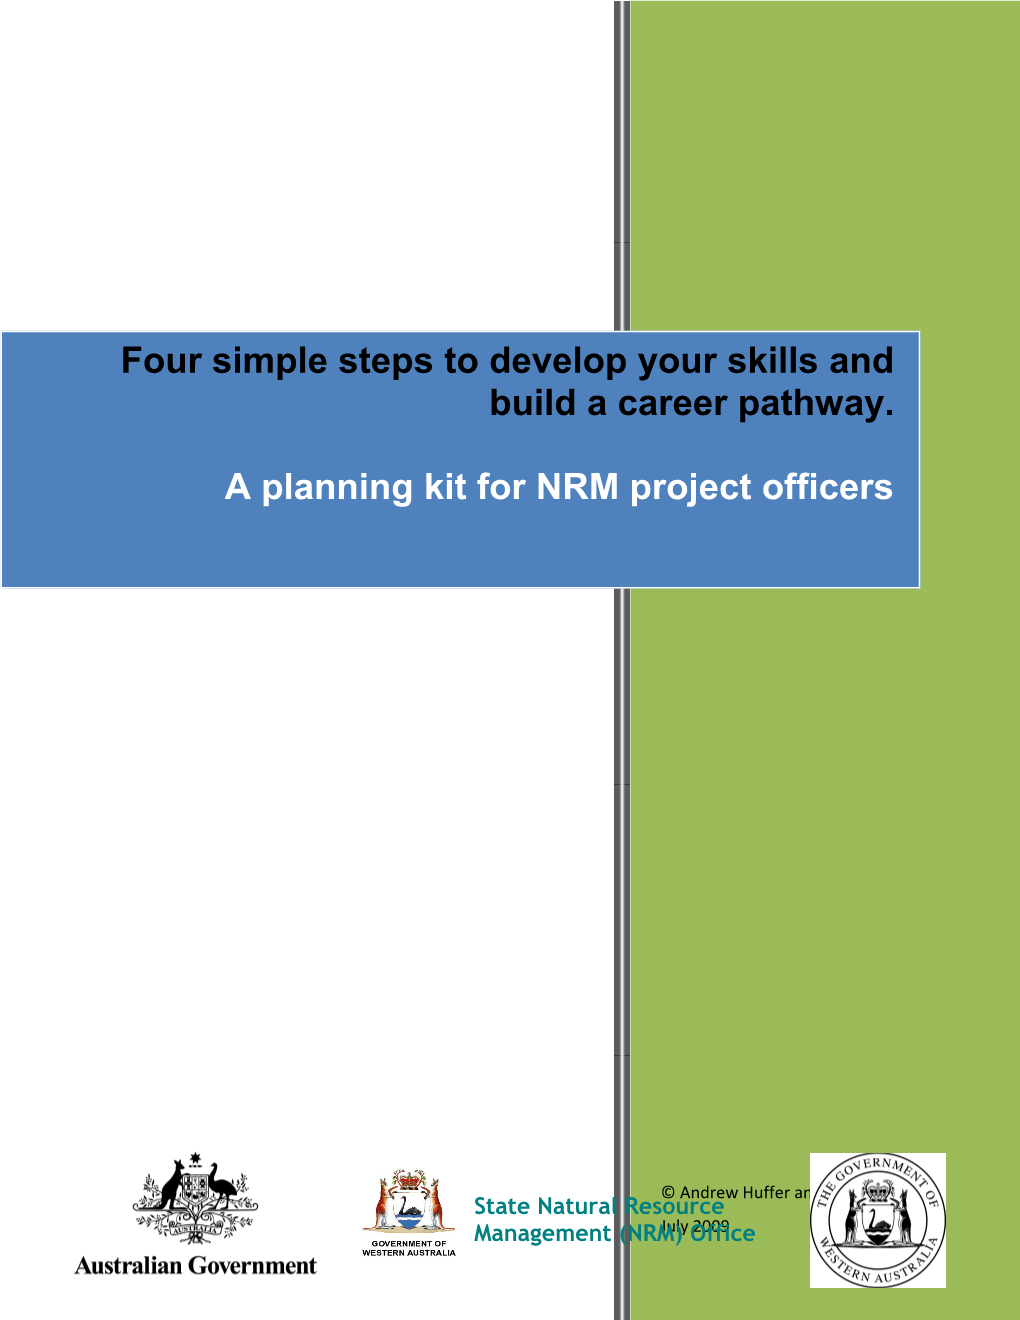 Four Simple Steps to Develop Your Skills and Build a Career Pathway. a Planning Kit For